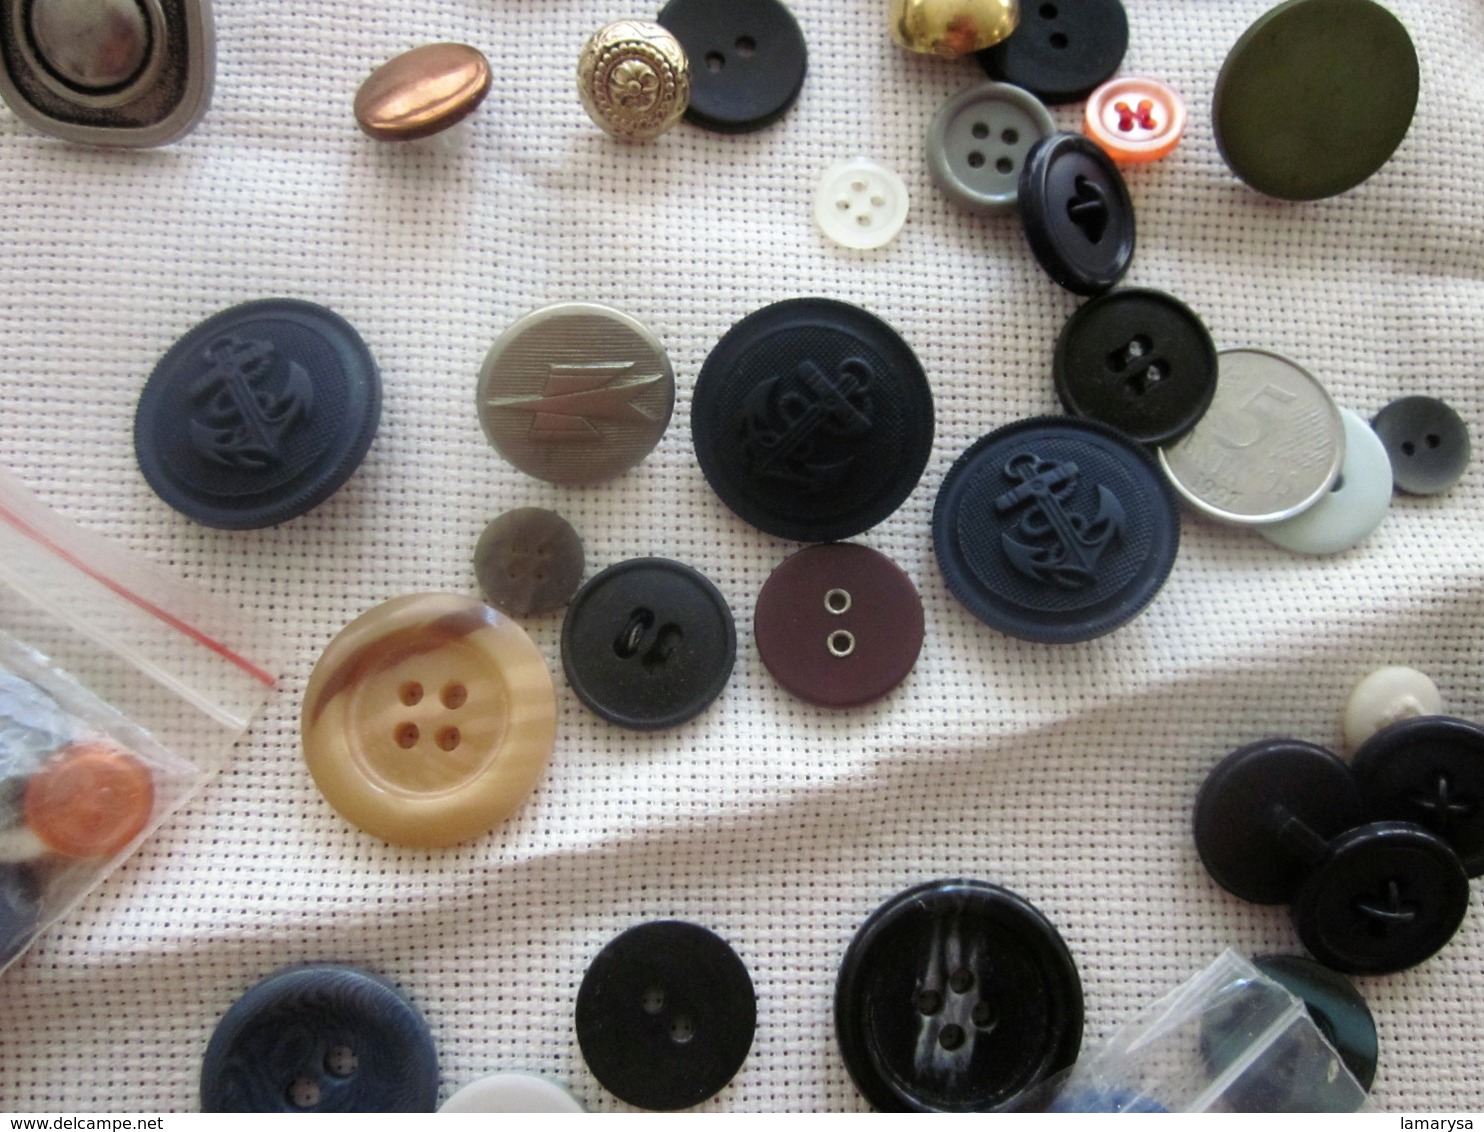 Vintage French Creative Hobbies, Rustic Canvas Embroidery Embroidery And Buttons All Kinds, All Sizes And All Colors - Manchetknopen & Boordknopen